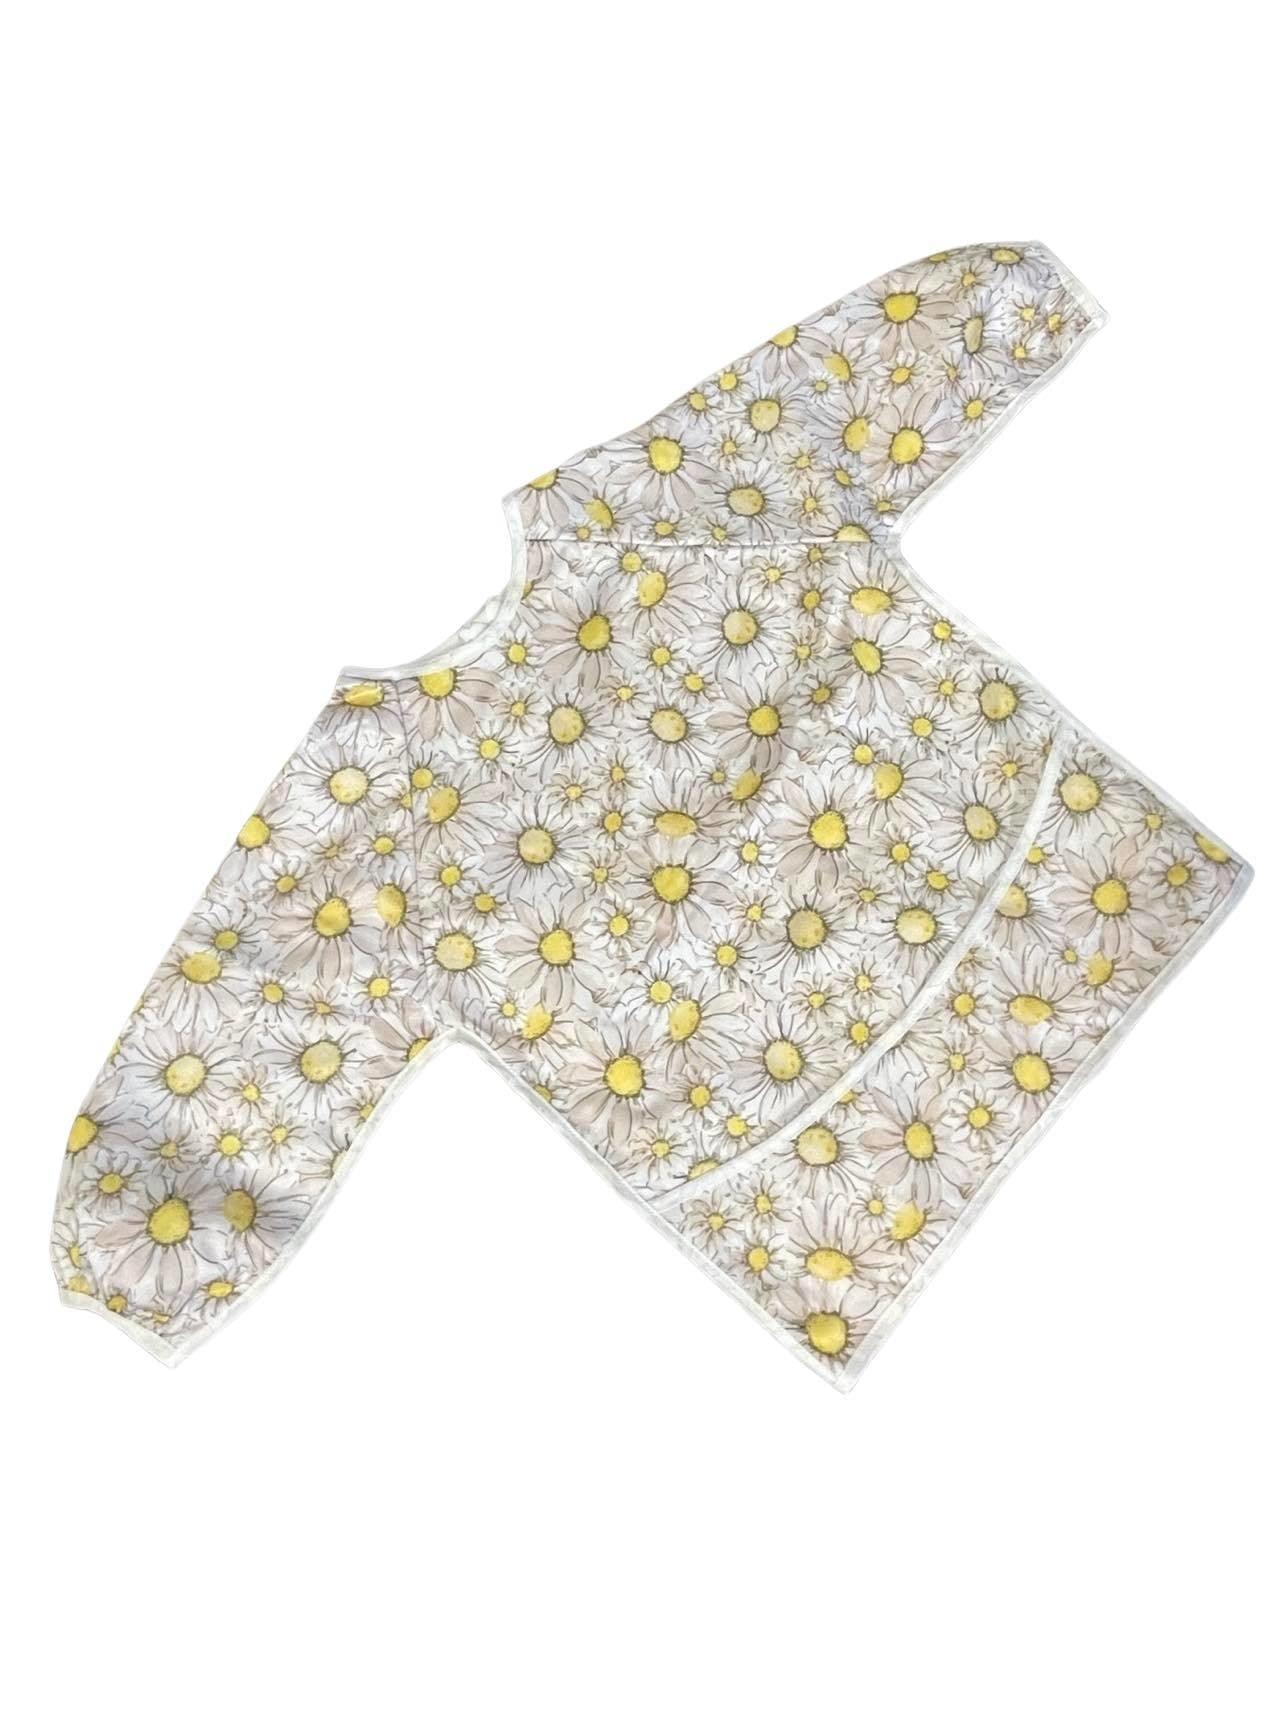 Yoho Baby & co. Toddler Sleeved Bib perfect for mealtimes and messy play. Gladys Designer Print